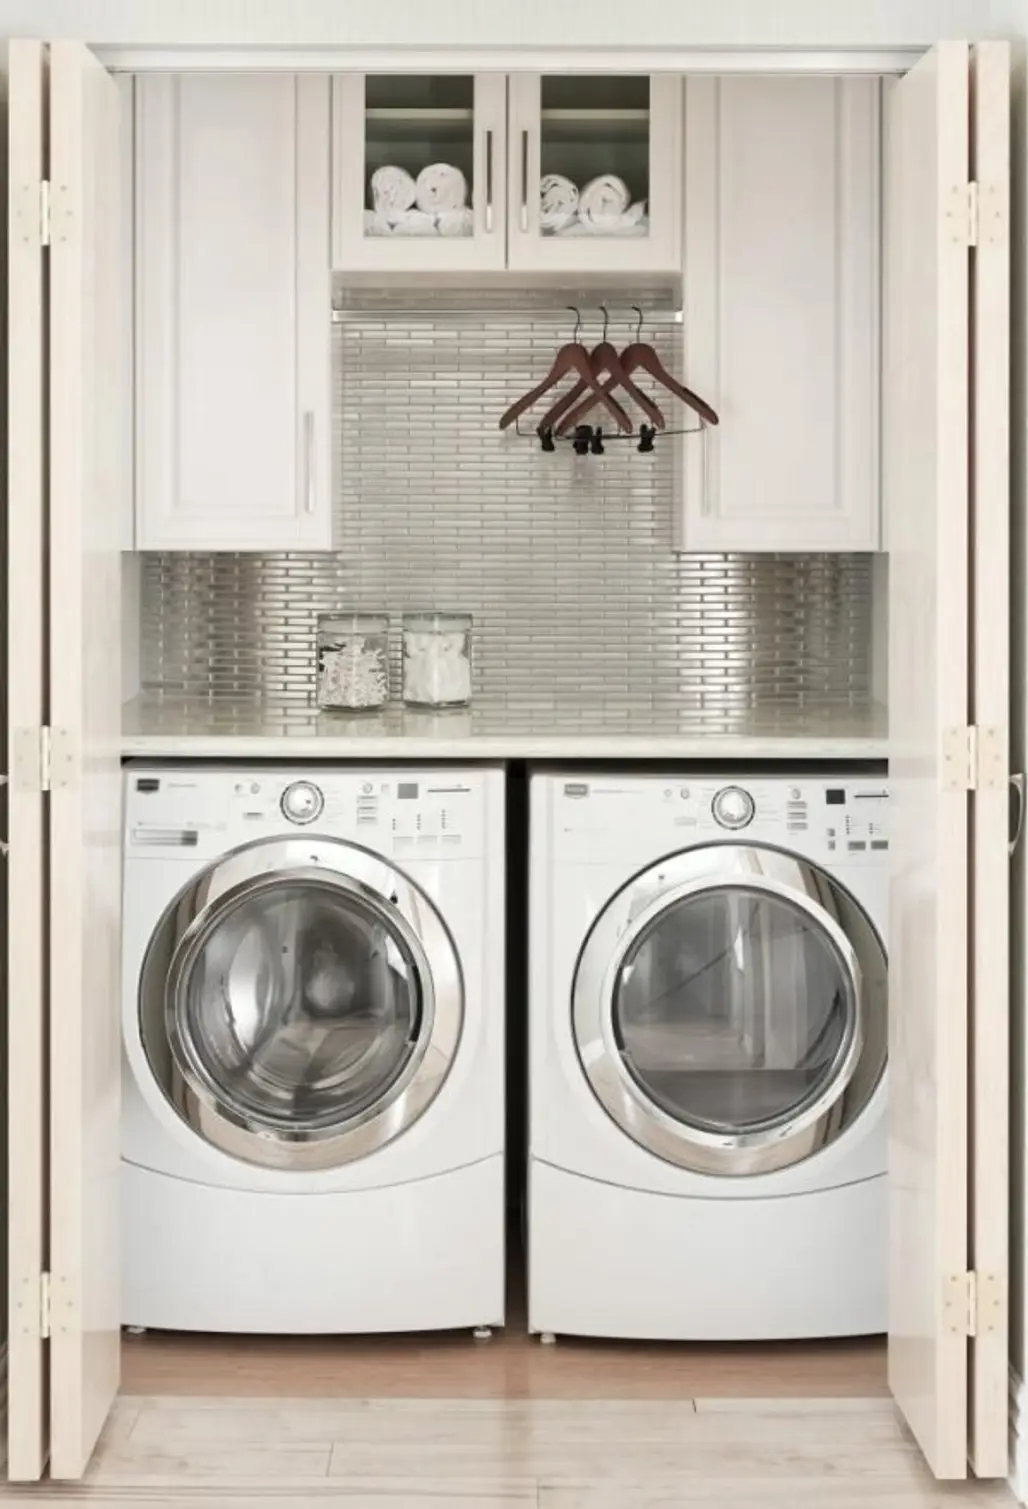 room,laundry room,laundry,major appliance,clothes dryer,